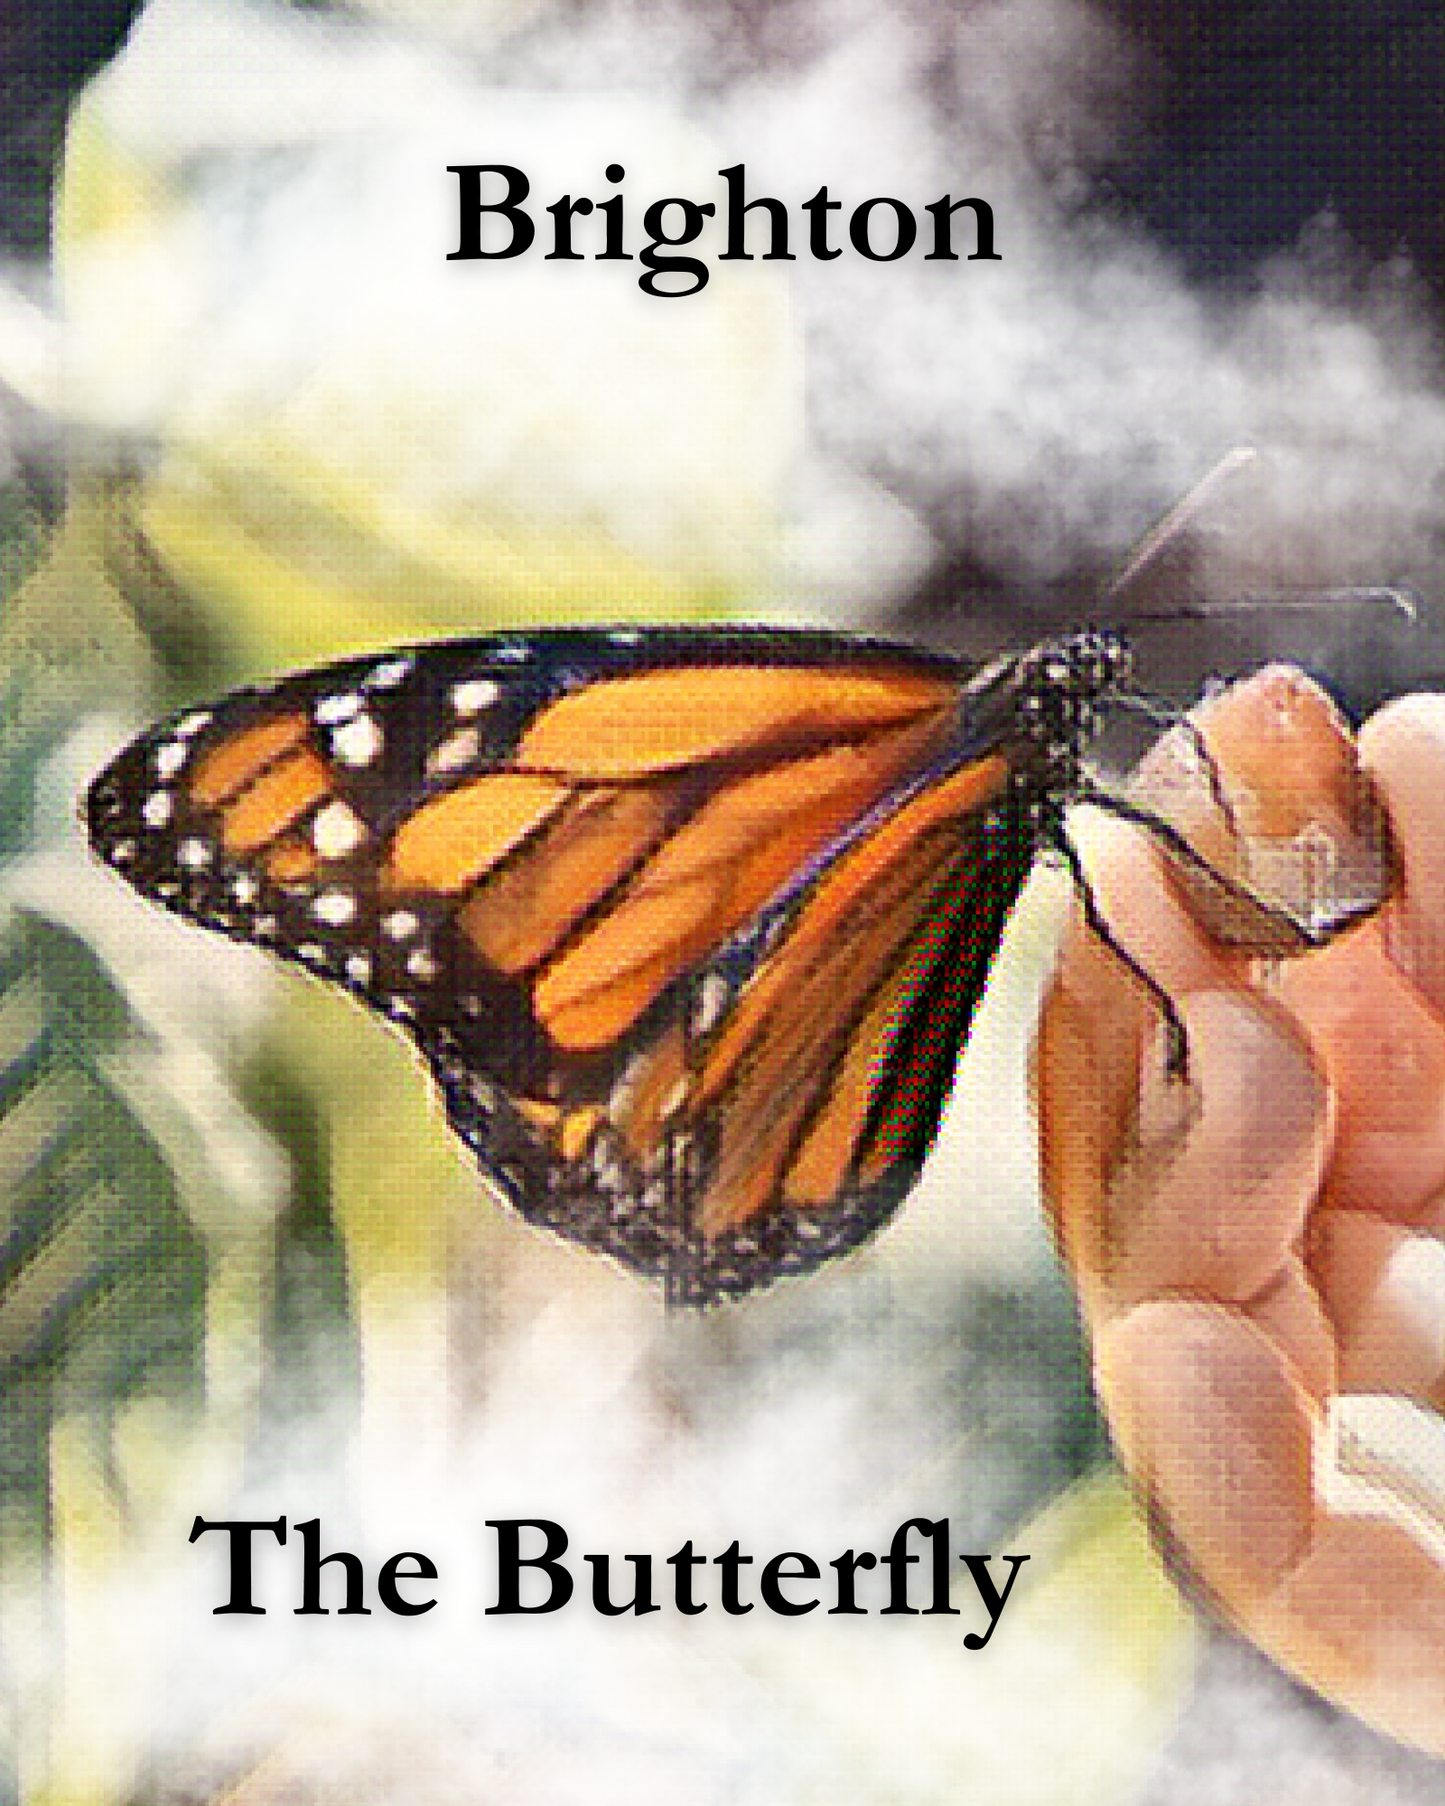 Brighton The Butterfly